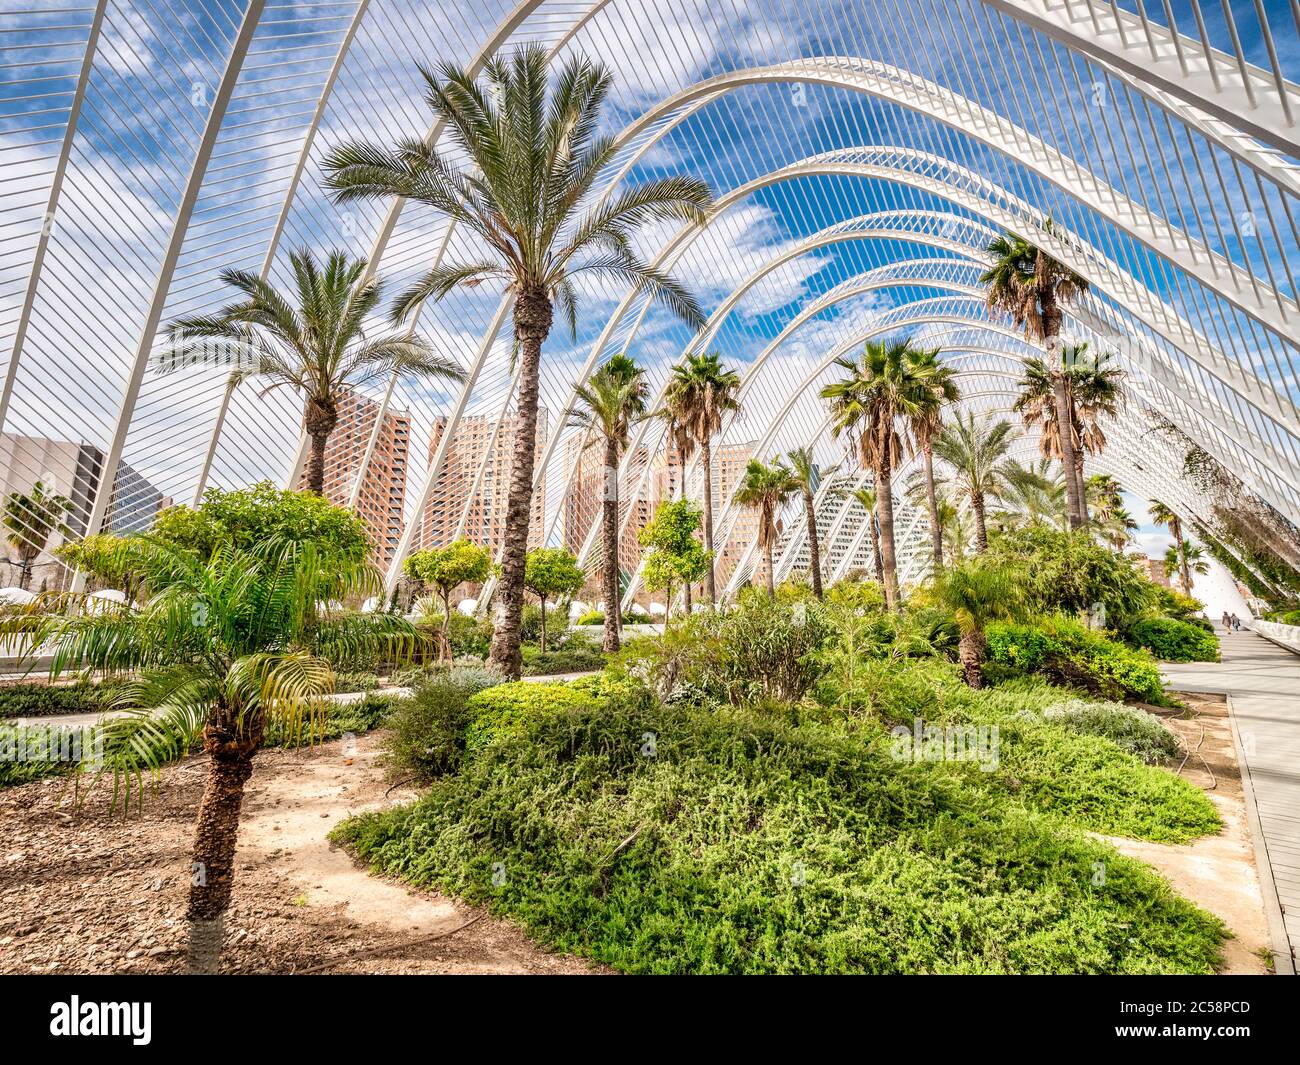 3 March 2020: Valencia, Spain - L'Umbracle, a sculpture garden and walk forming an entrance to the City of Arts and Sciences in Valencia. Stock Photo